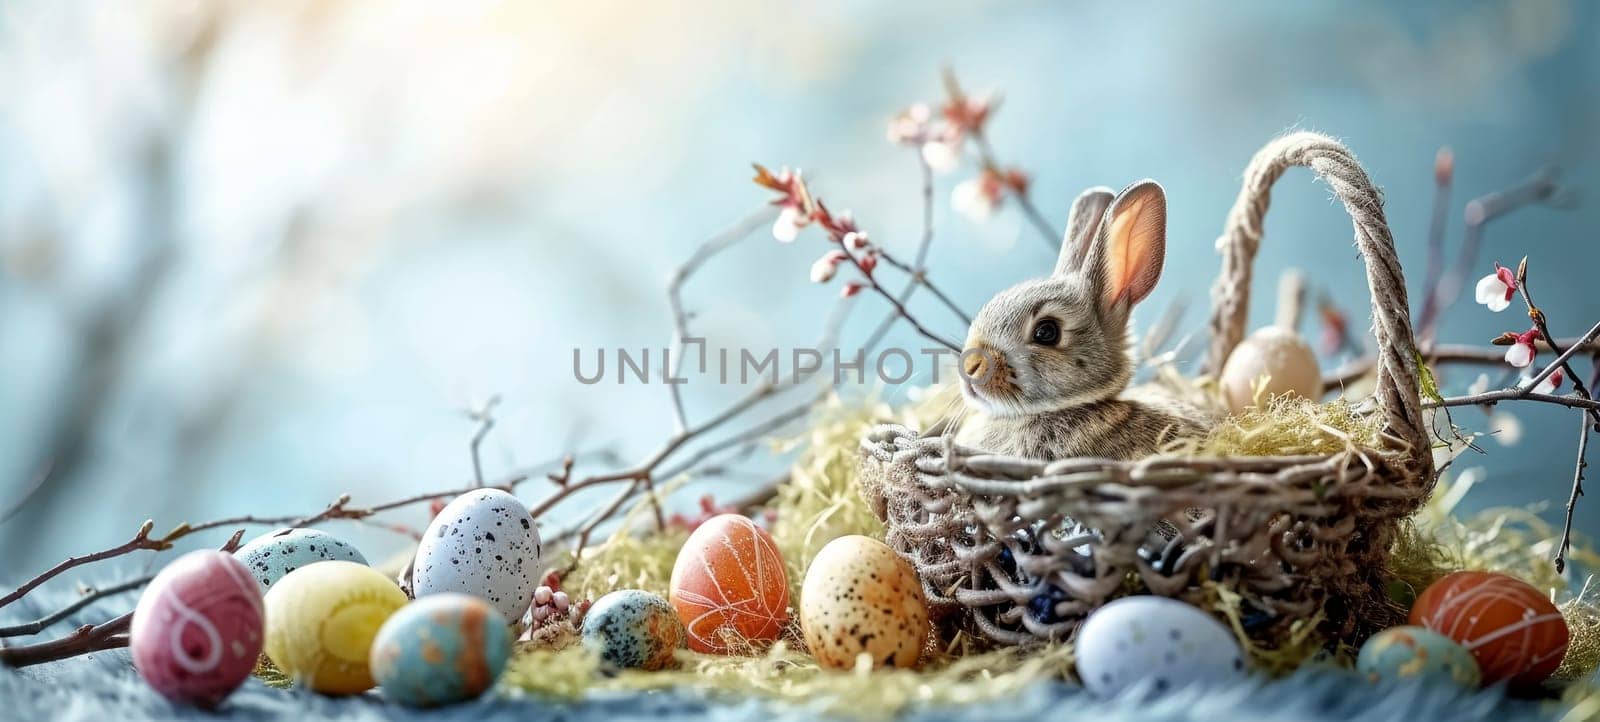 Rabbit in wicker basket with colored Easter eggs and flowers on a blue background. Easter celebration concept. Design for greeting card or invitation with place for text. Wide banner composition